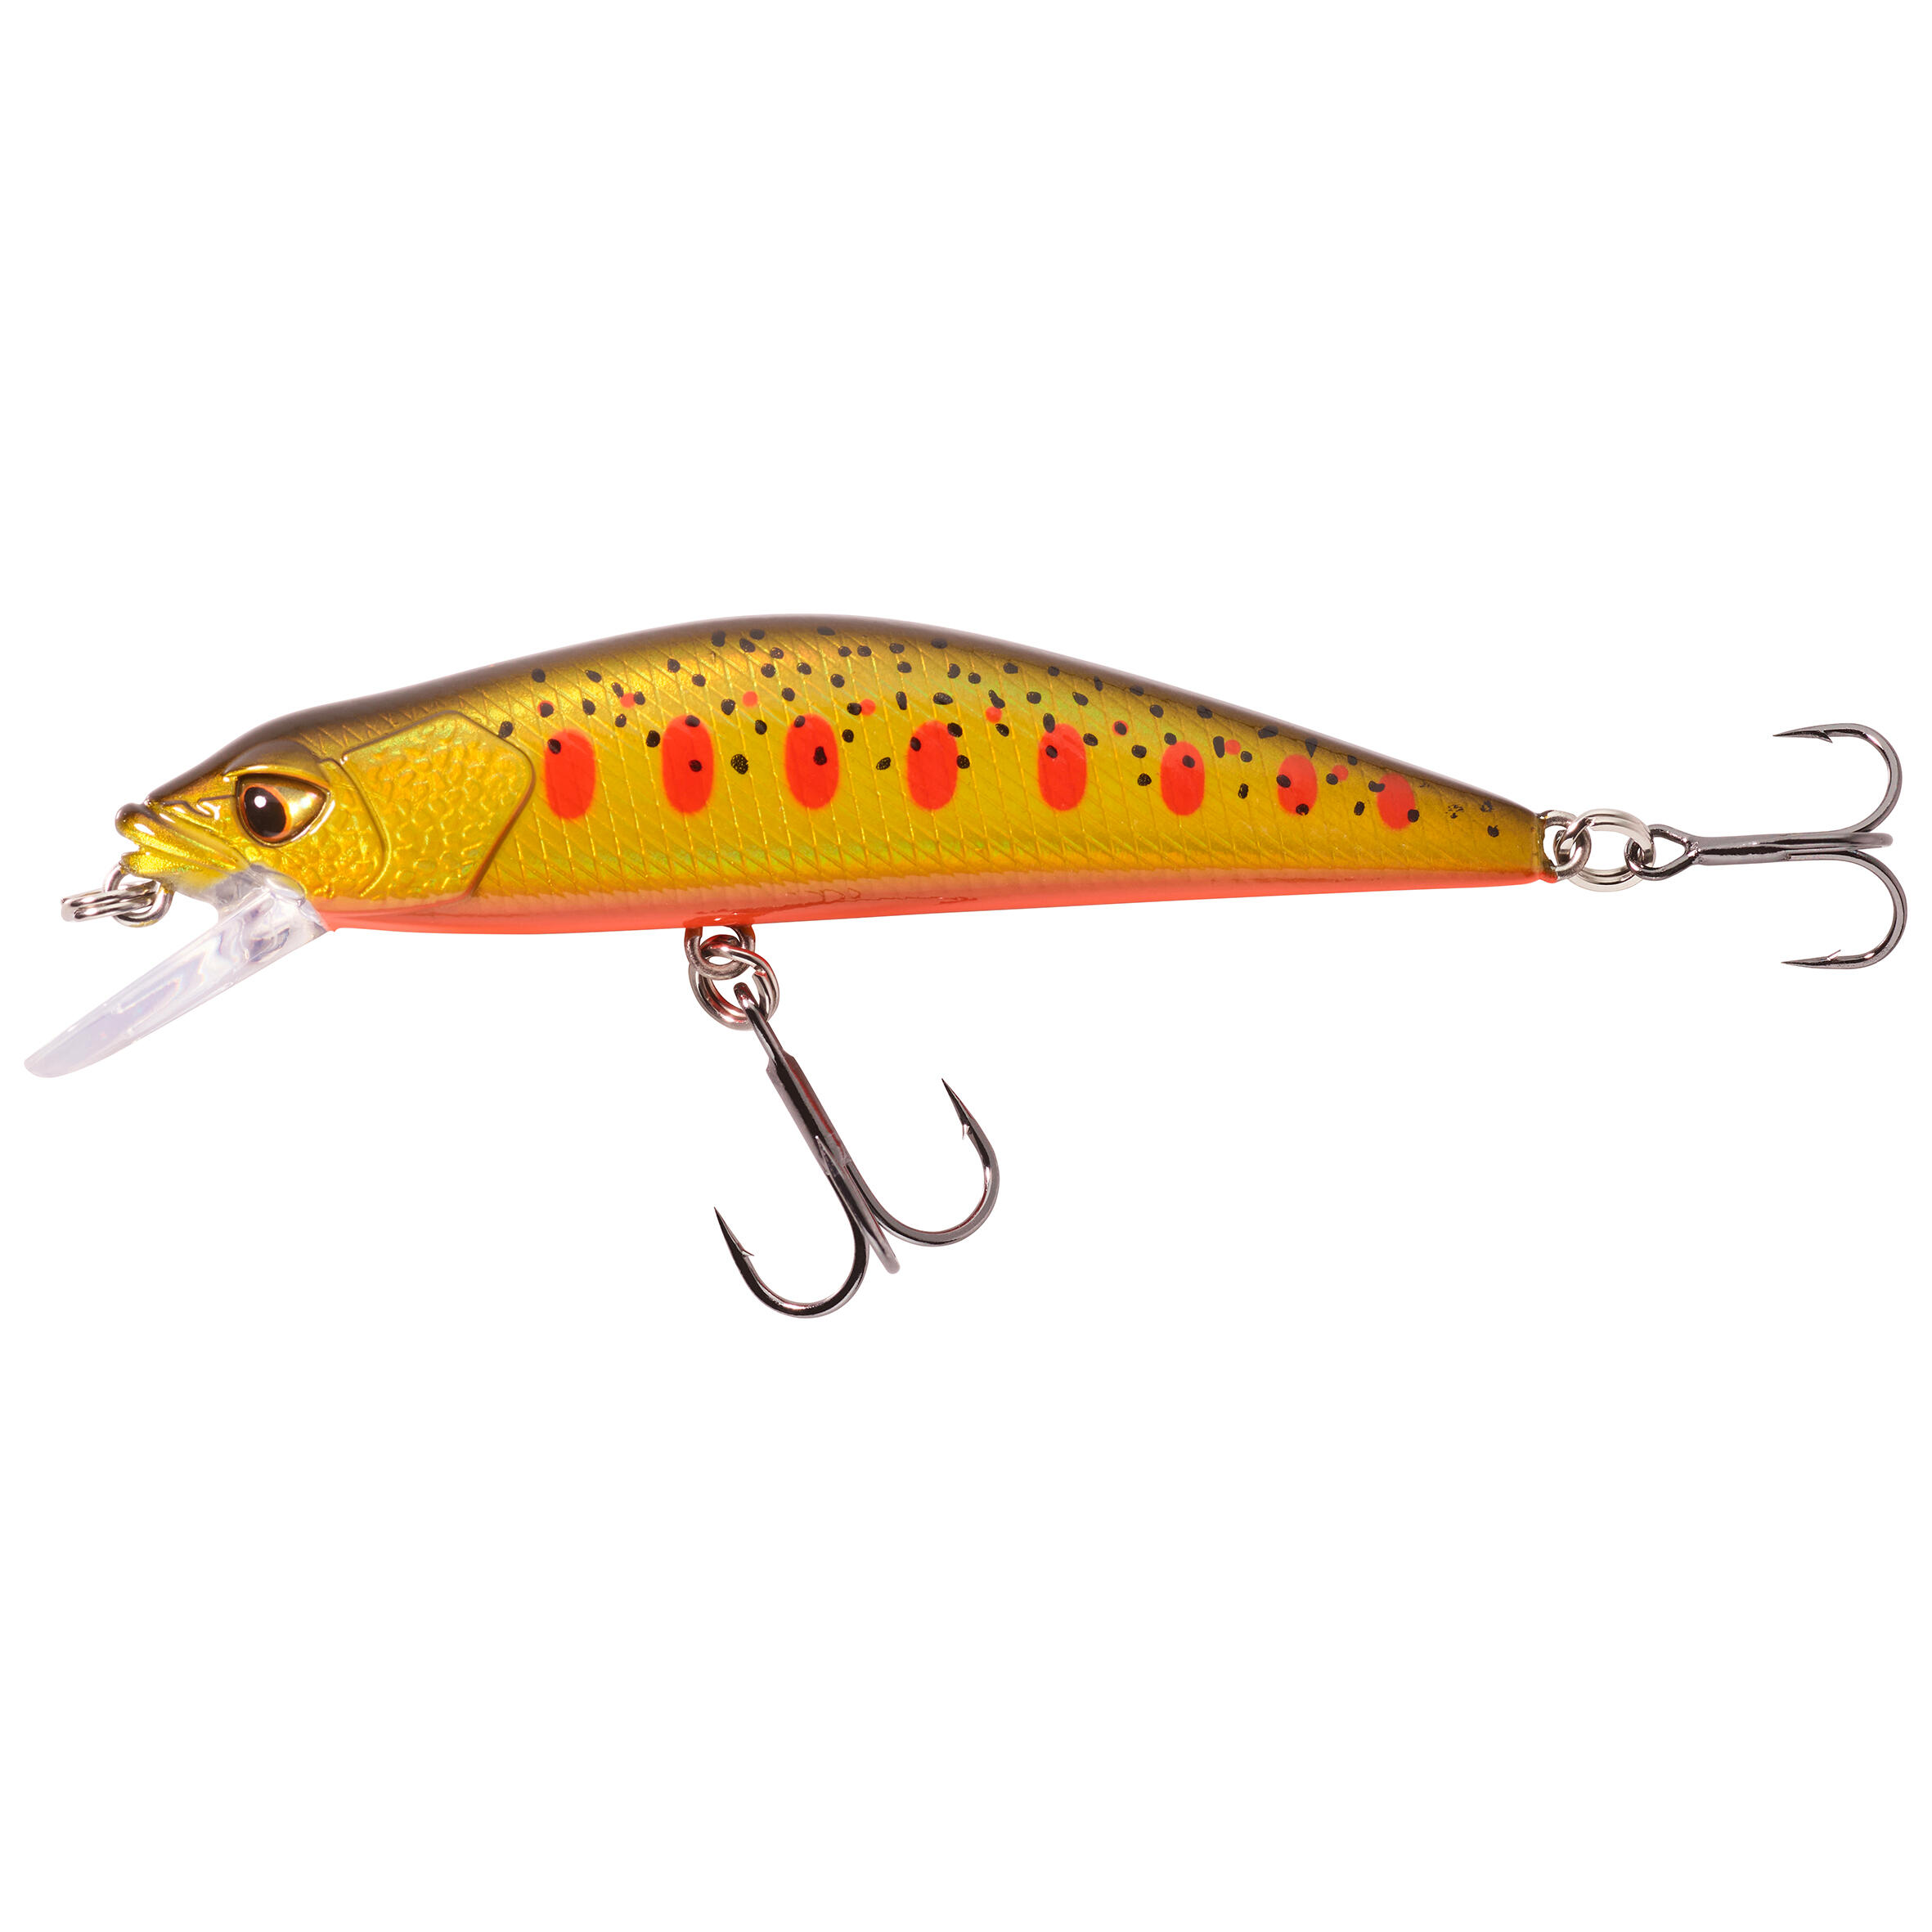 Caperlan Minnow Hard Lure For Trout Wxm Mnwfs US 85 Ayu - One Size